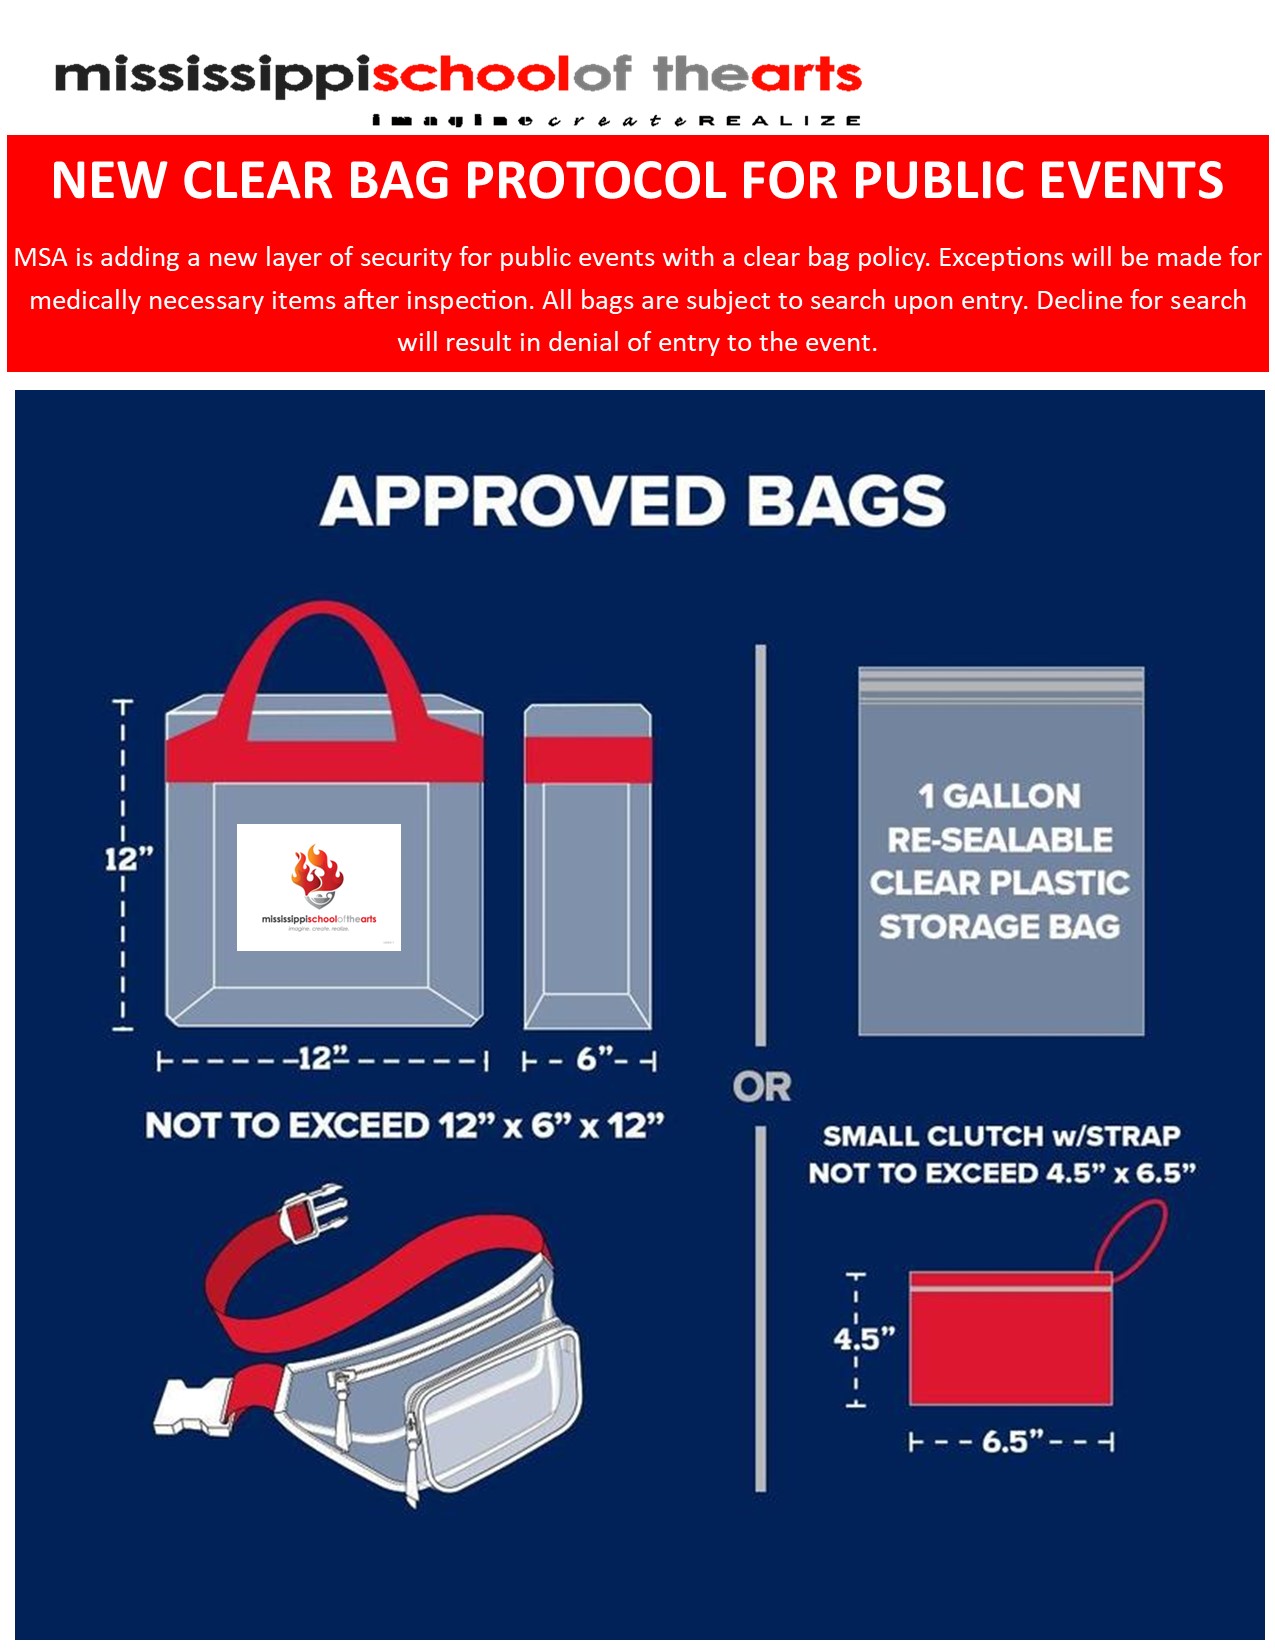 MSA Implements New Clear Bag Policy for Public Events